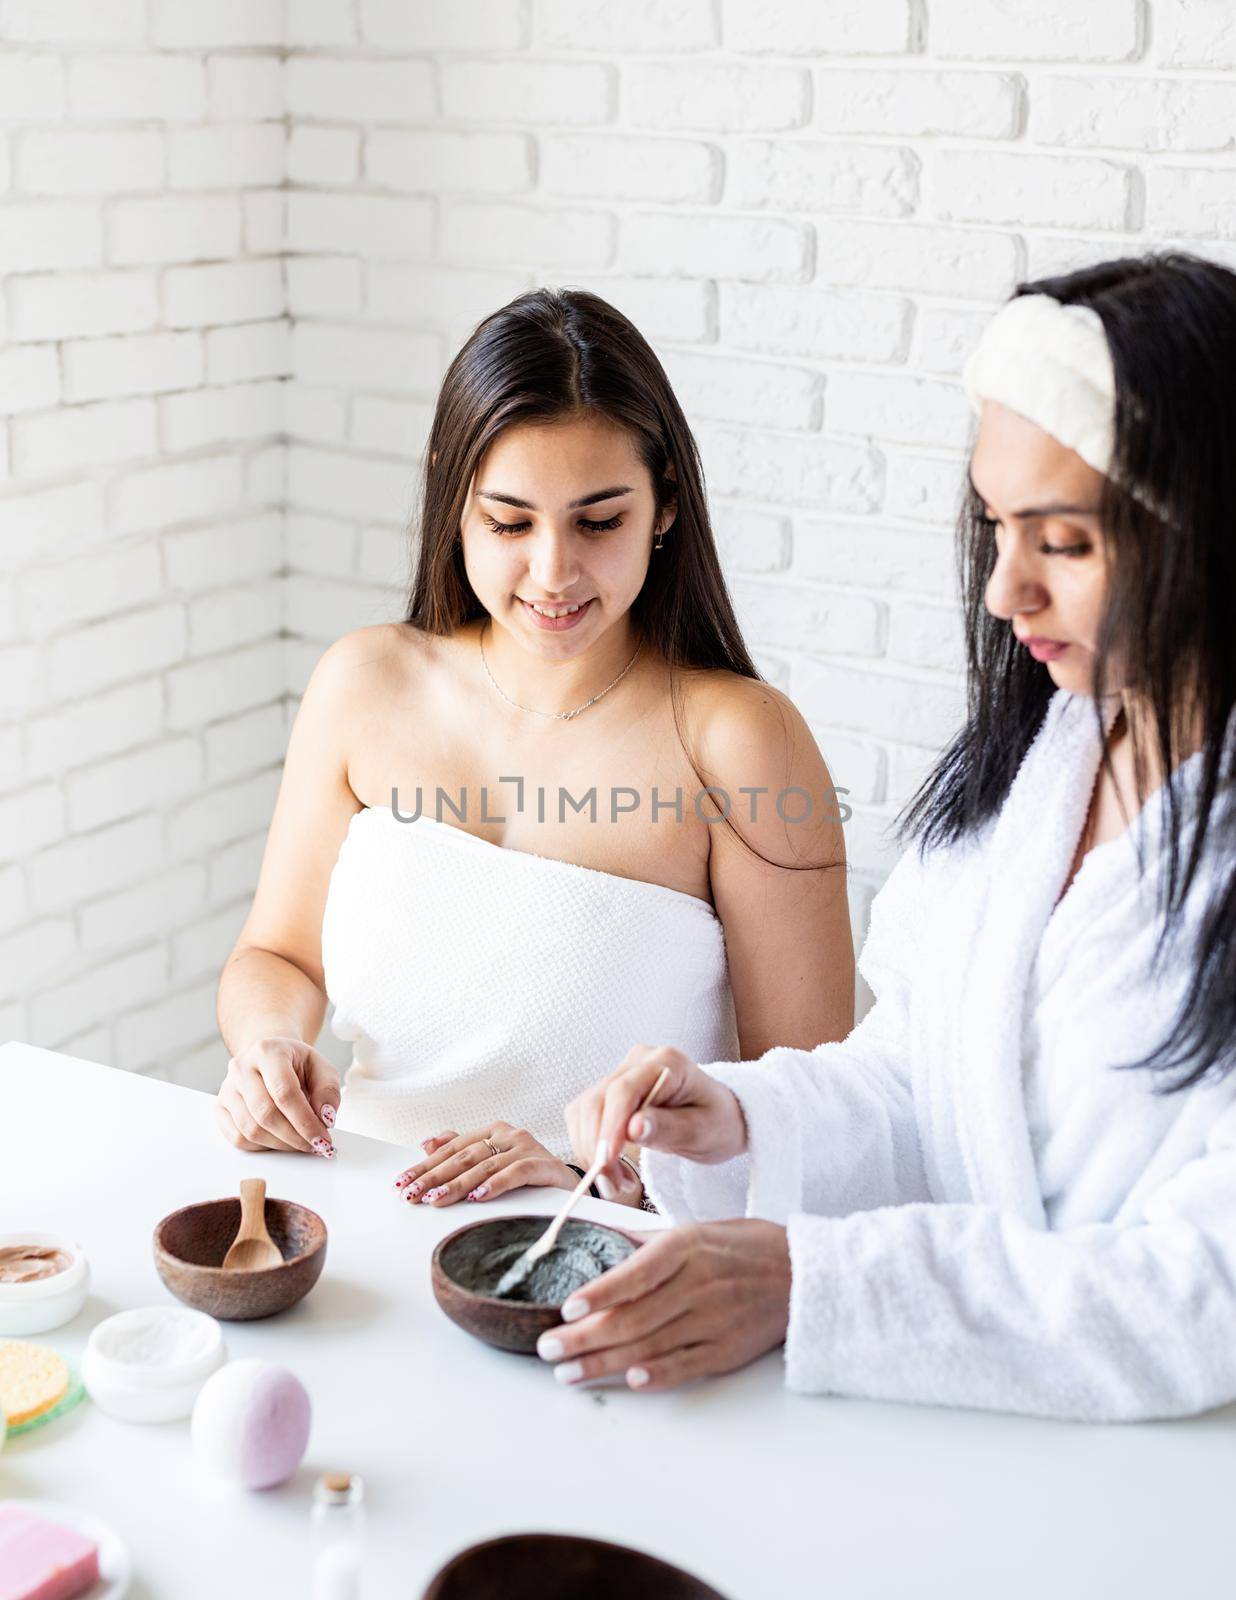 Spa and wellness concept. Self care. Women hands making facial mask doing spa procedures